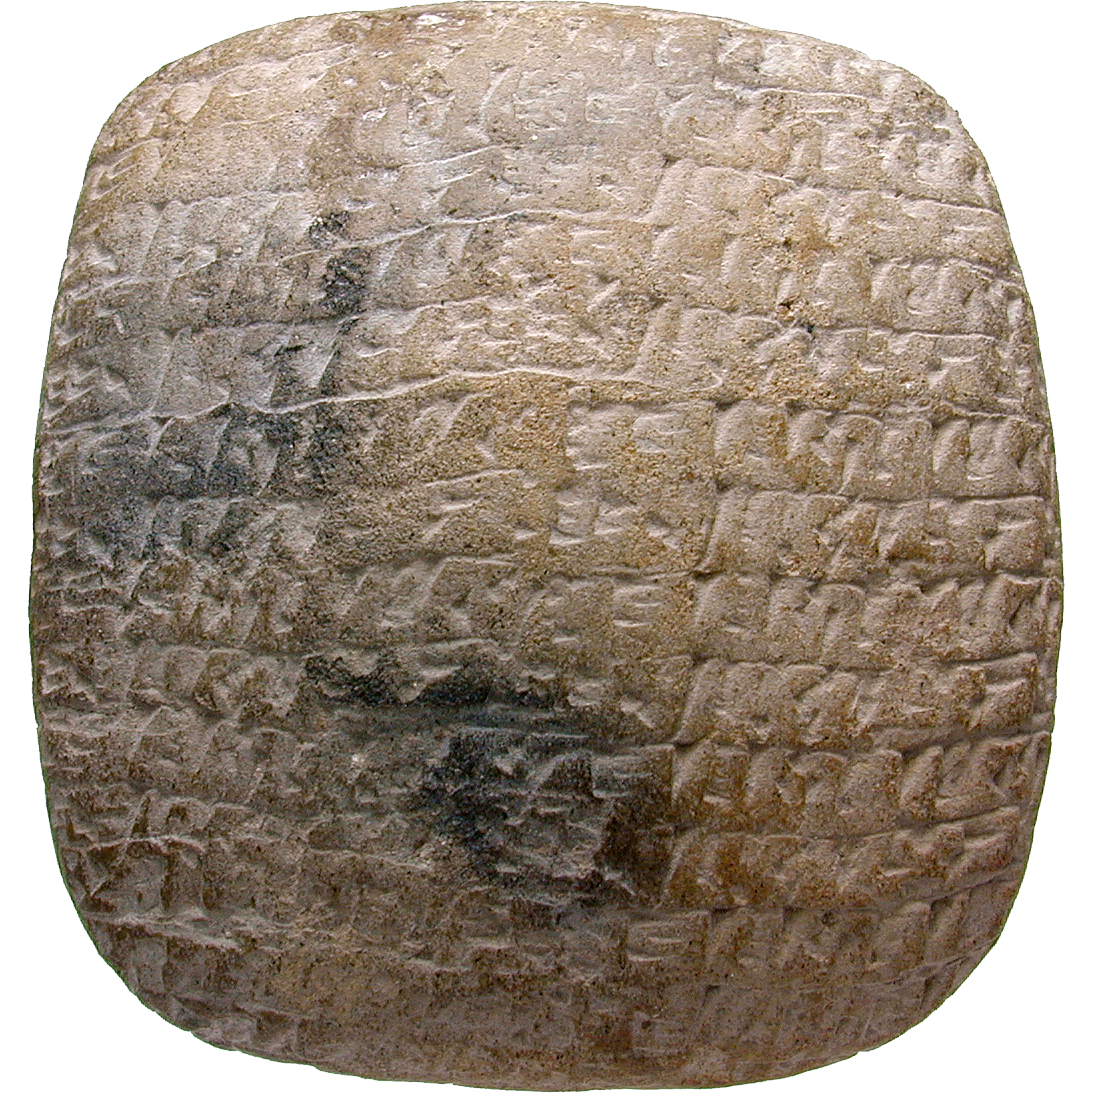 Mesopotamia, Clay Tablet with Cuneiform Writing (reverse)